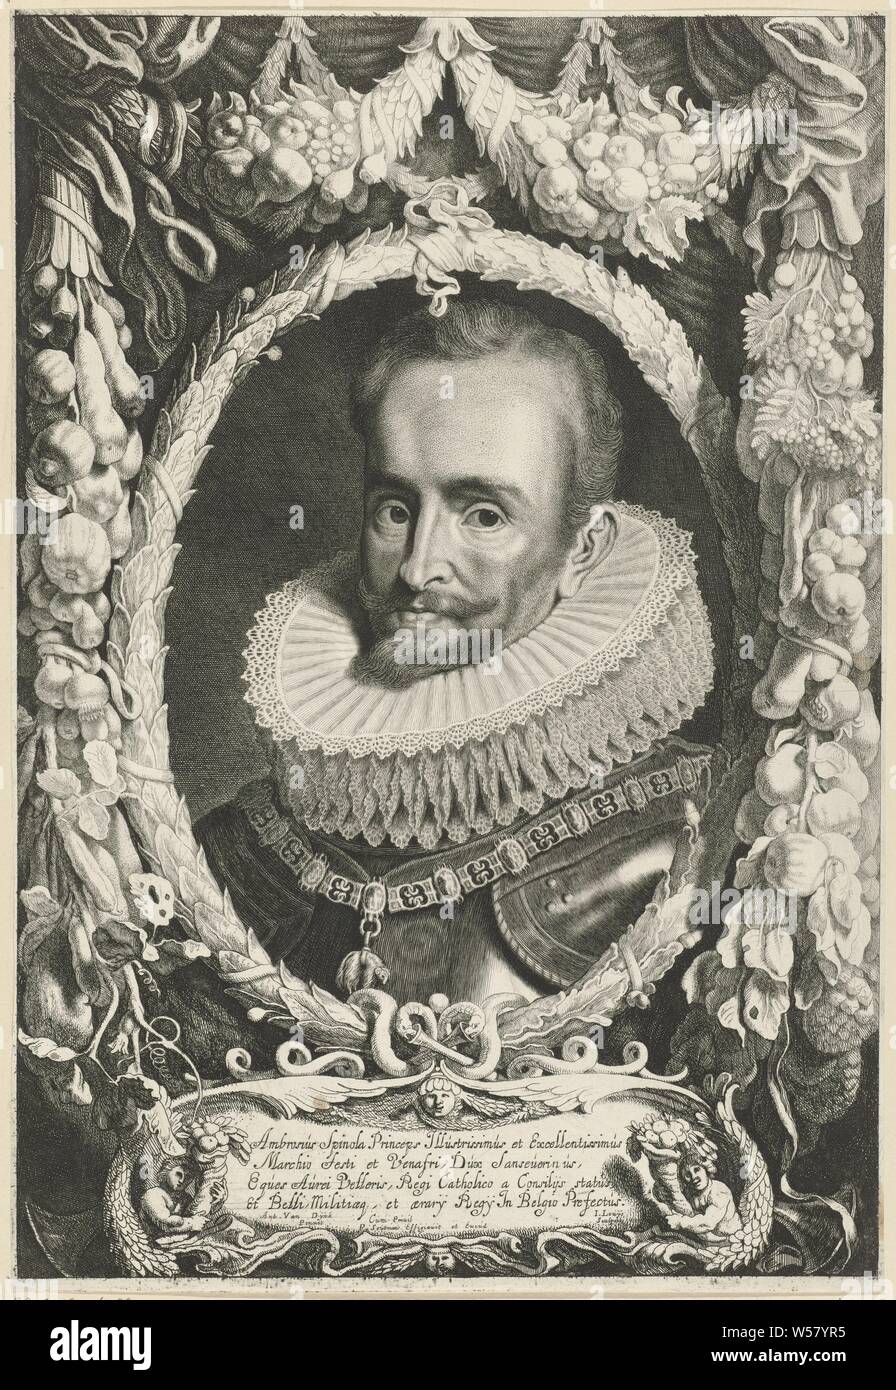 Portrait of Ambrogio Spinola Ferdinandus II [us] and III [us] Imperatorum Domus Austriacae (series title), Portrait of Ambrogio Spinola, Marquis de los Balbases. Around his neck a chain with the order of the Golden Fleece, knighthood order of the Golden Fleece, Ambrogio Spinola (Marquis de los Balbases), Jacob Louys (mentioned on object), Haarlem, 1644 - 1650, paper, etching, h 401 mm × w 274 mm Stock Photo